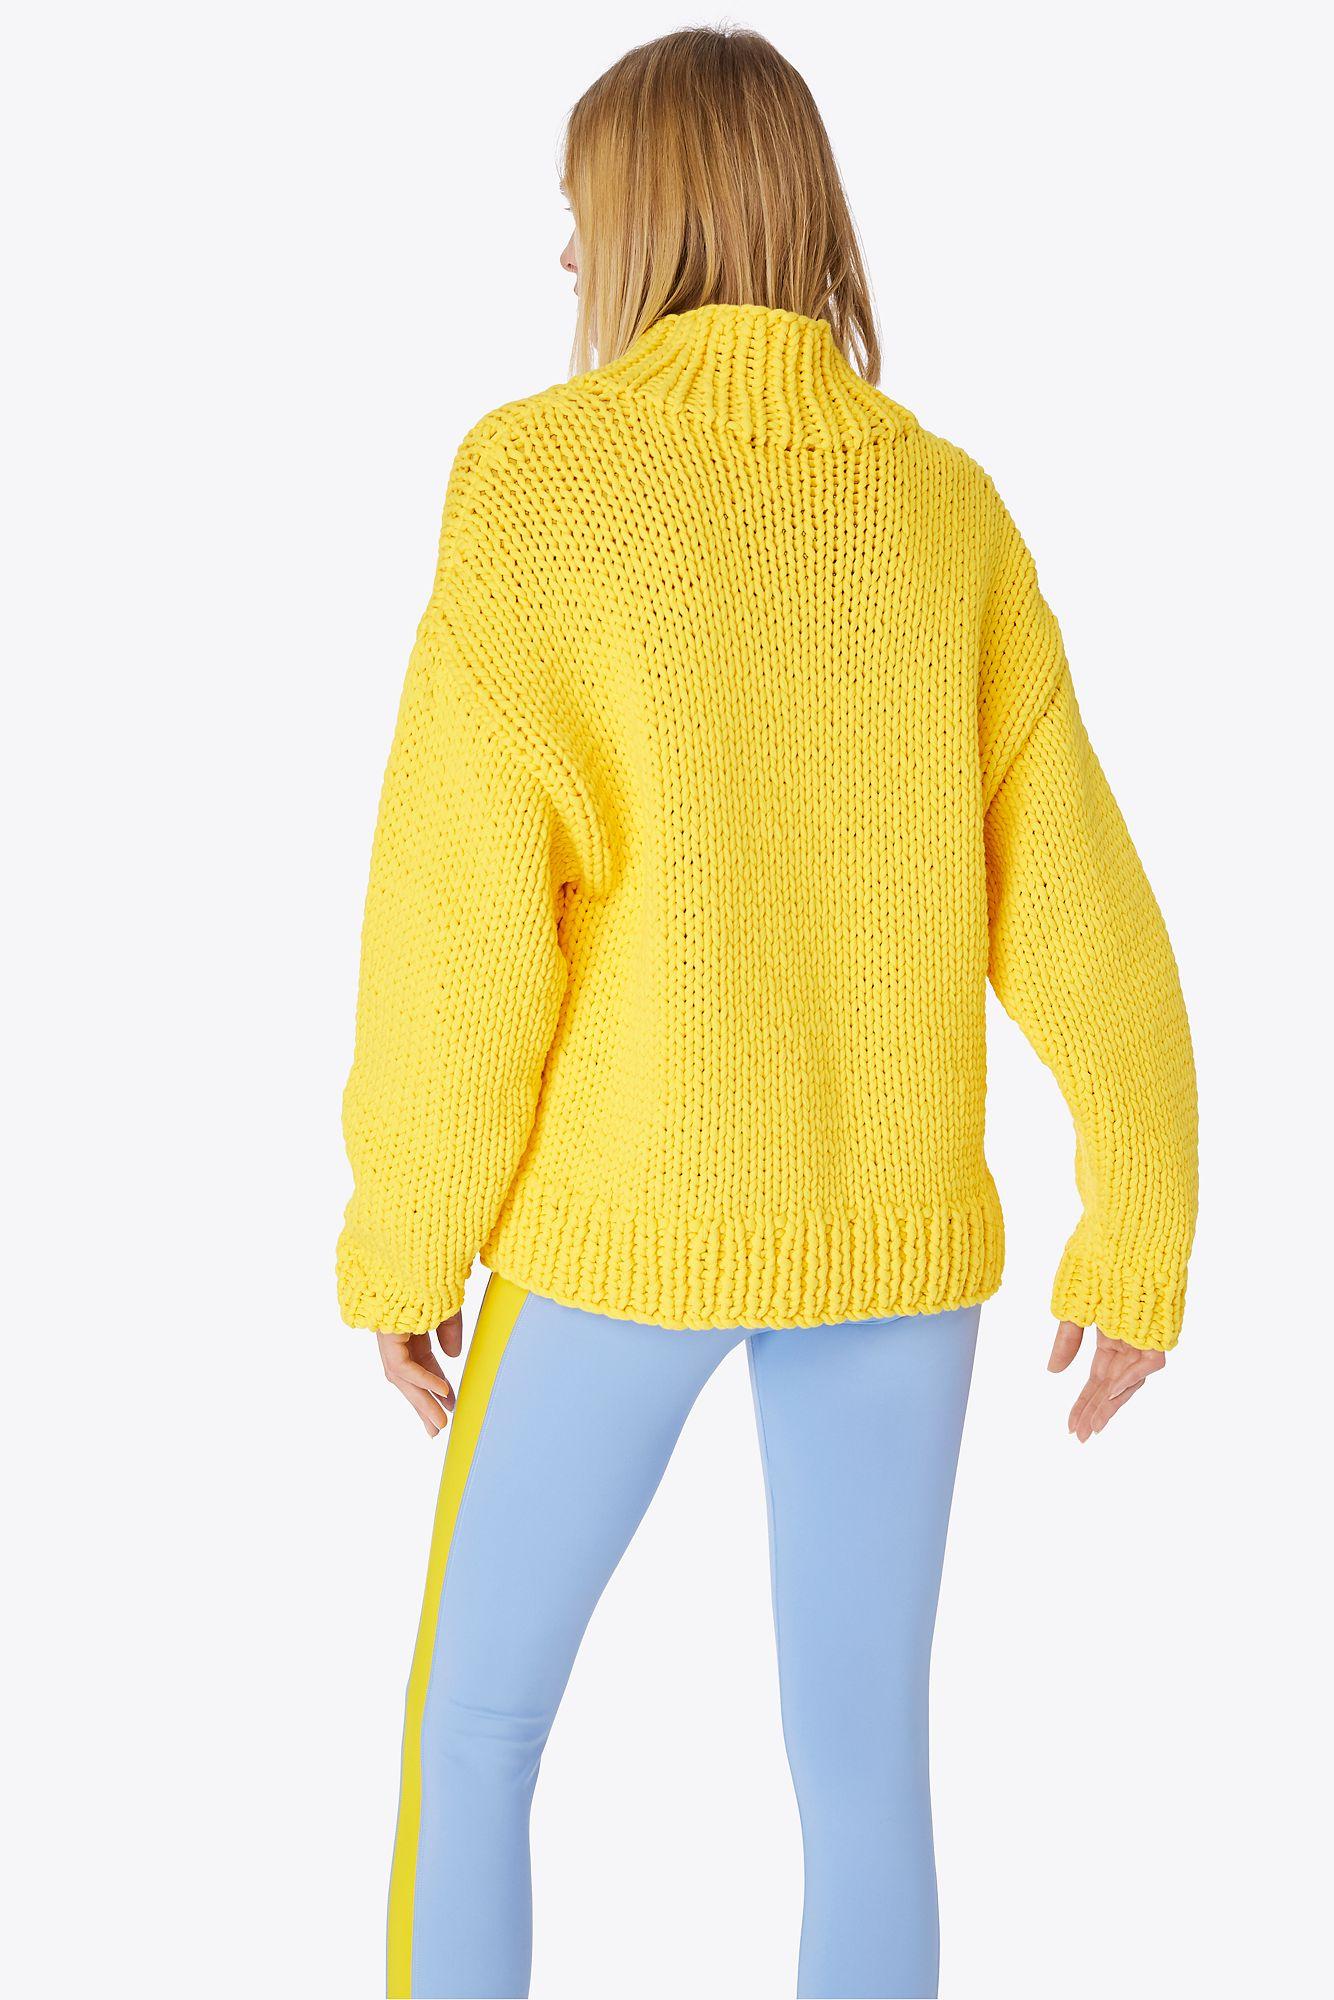 Tory Sport Hand-knit Sweater in Yellow | Lyst